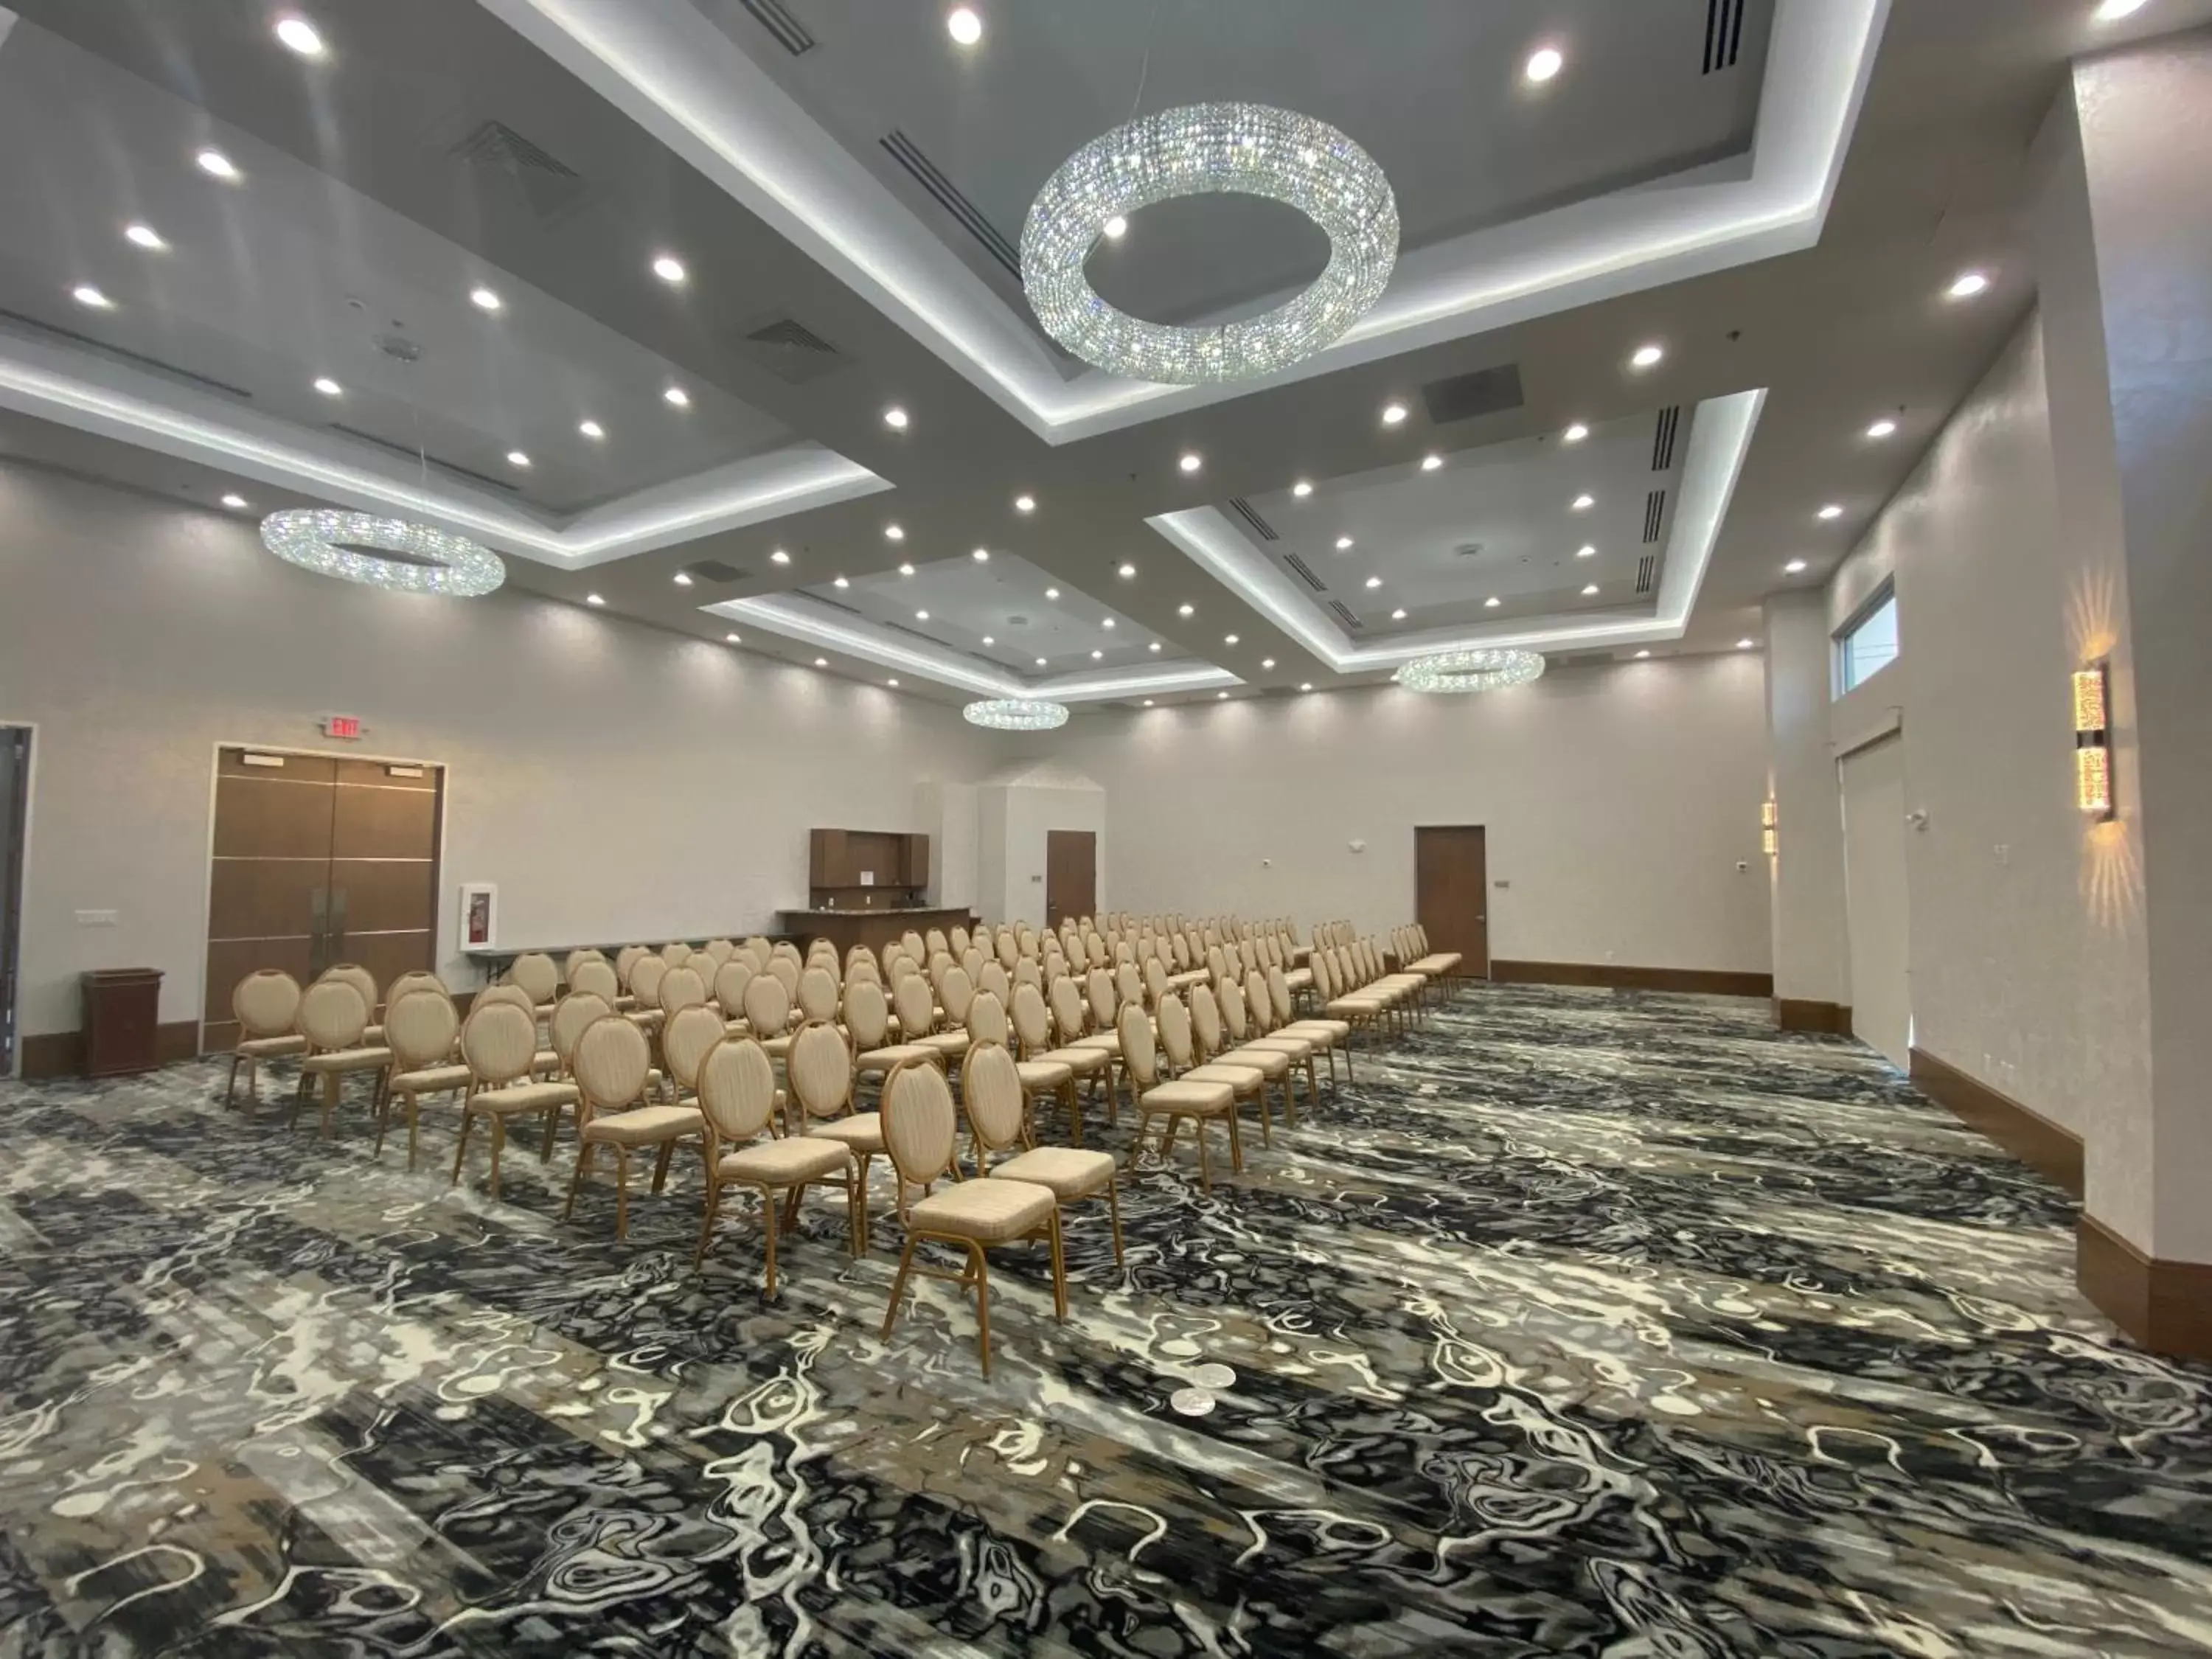 Banquet/Function facilities in Tru By Hilton Katy Houston West, Tx